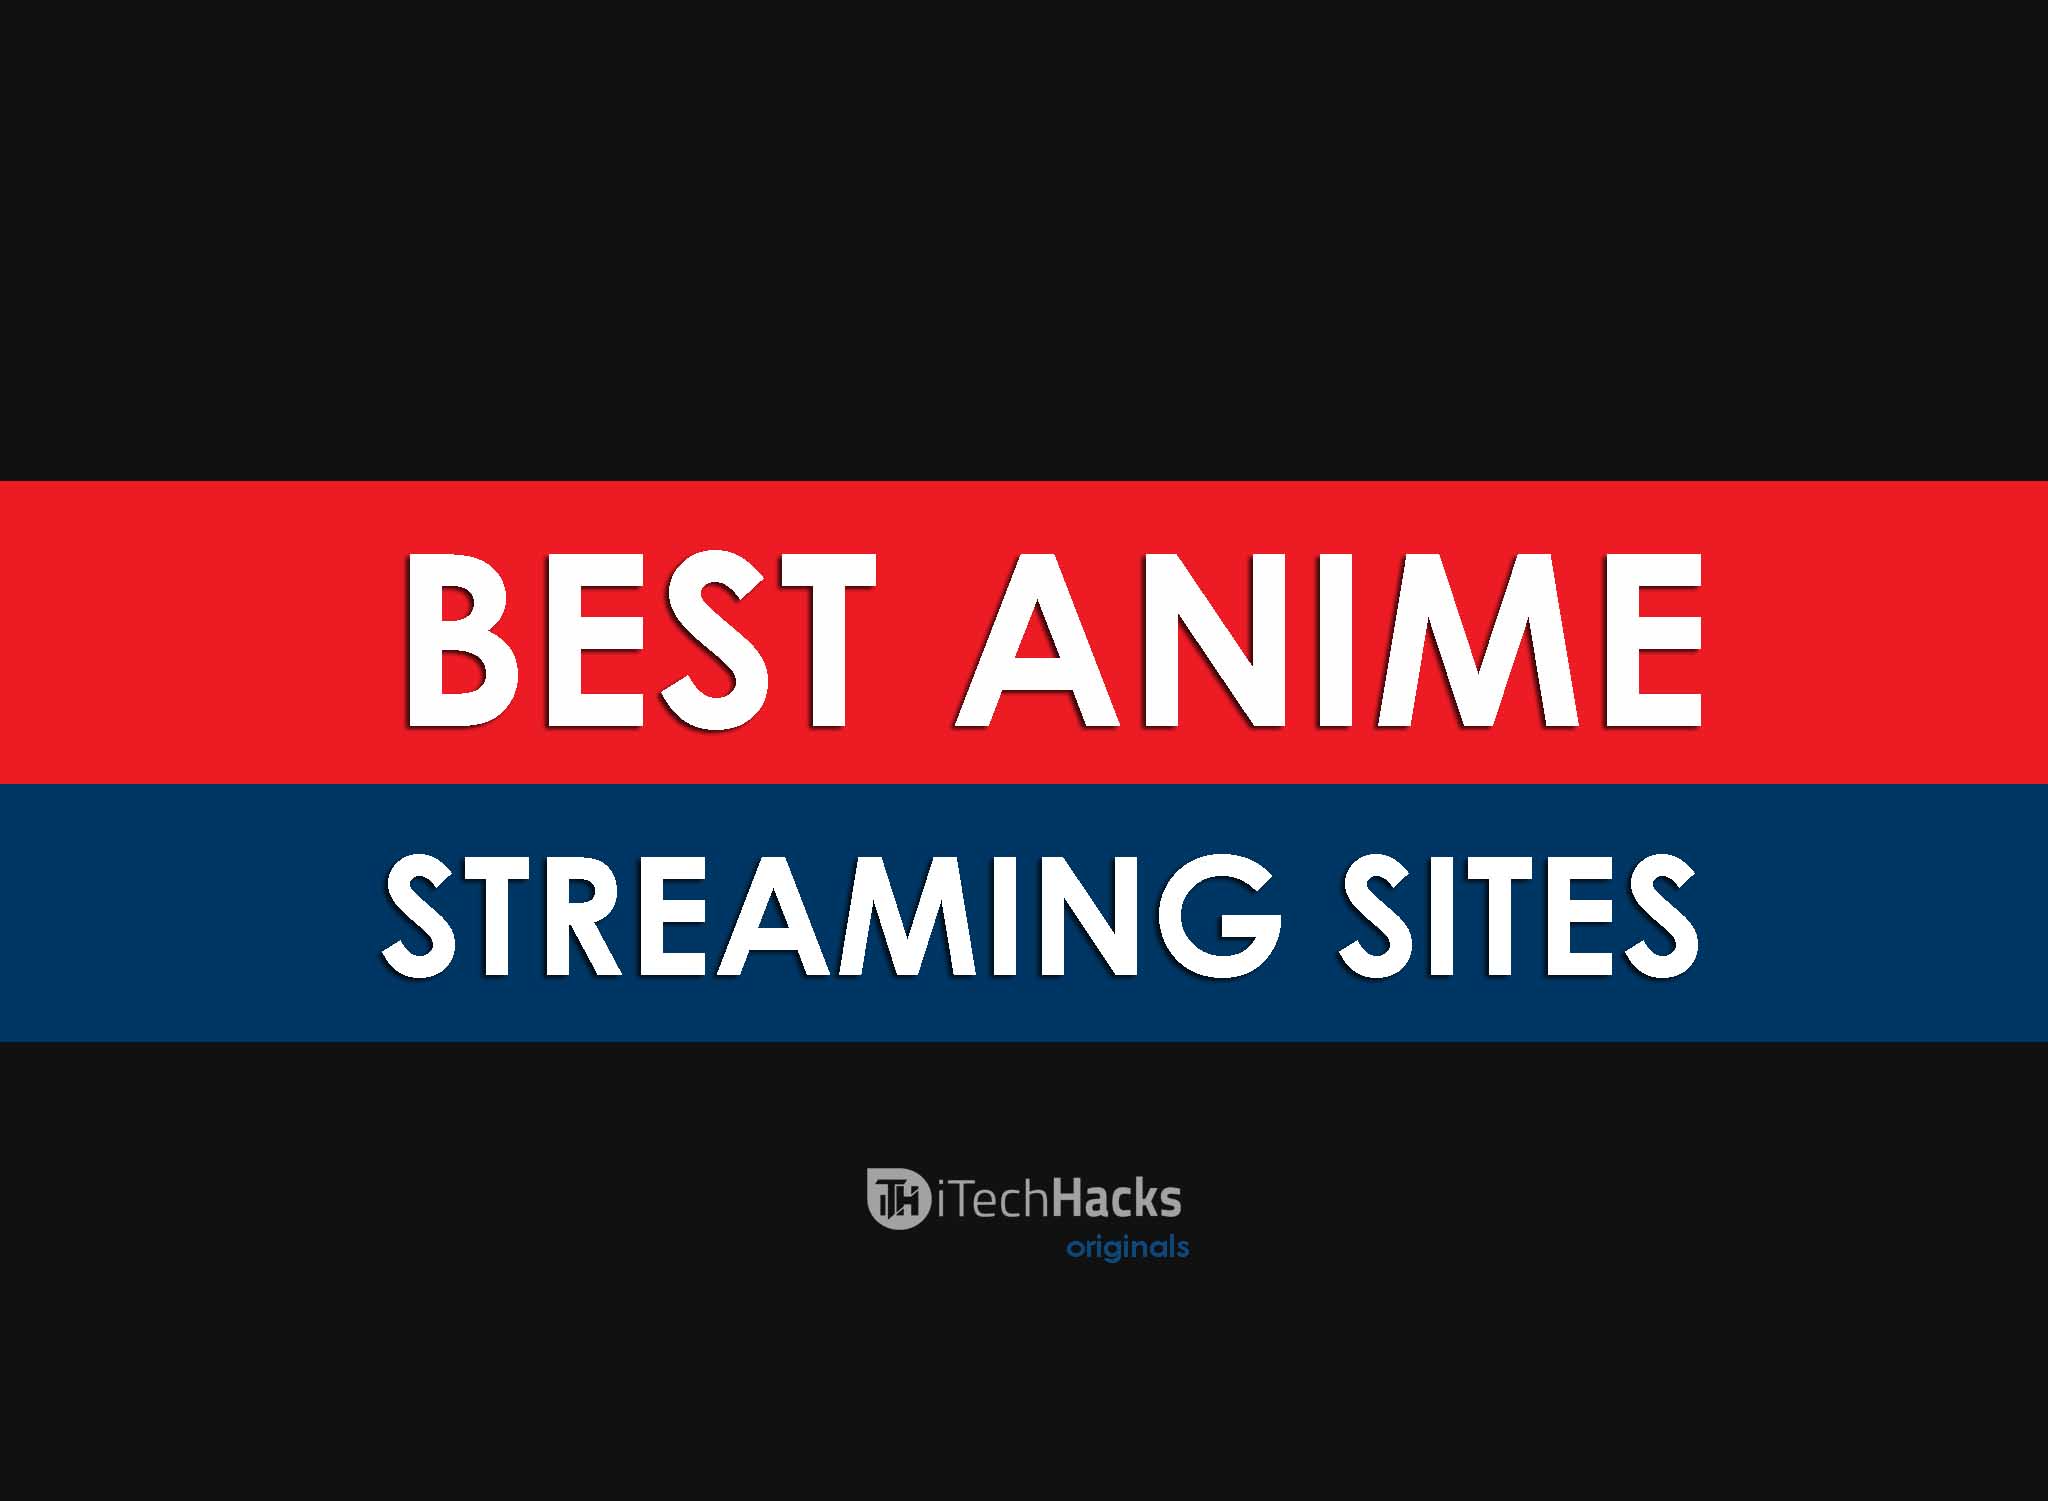 10 Best Places to Watch Chinese Anime Online! (Free Websites & Apps) - Anime  Ukiyo